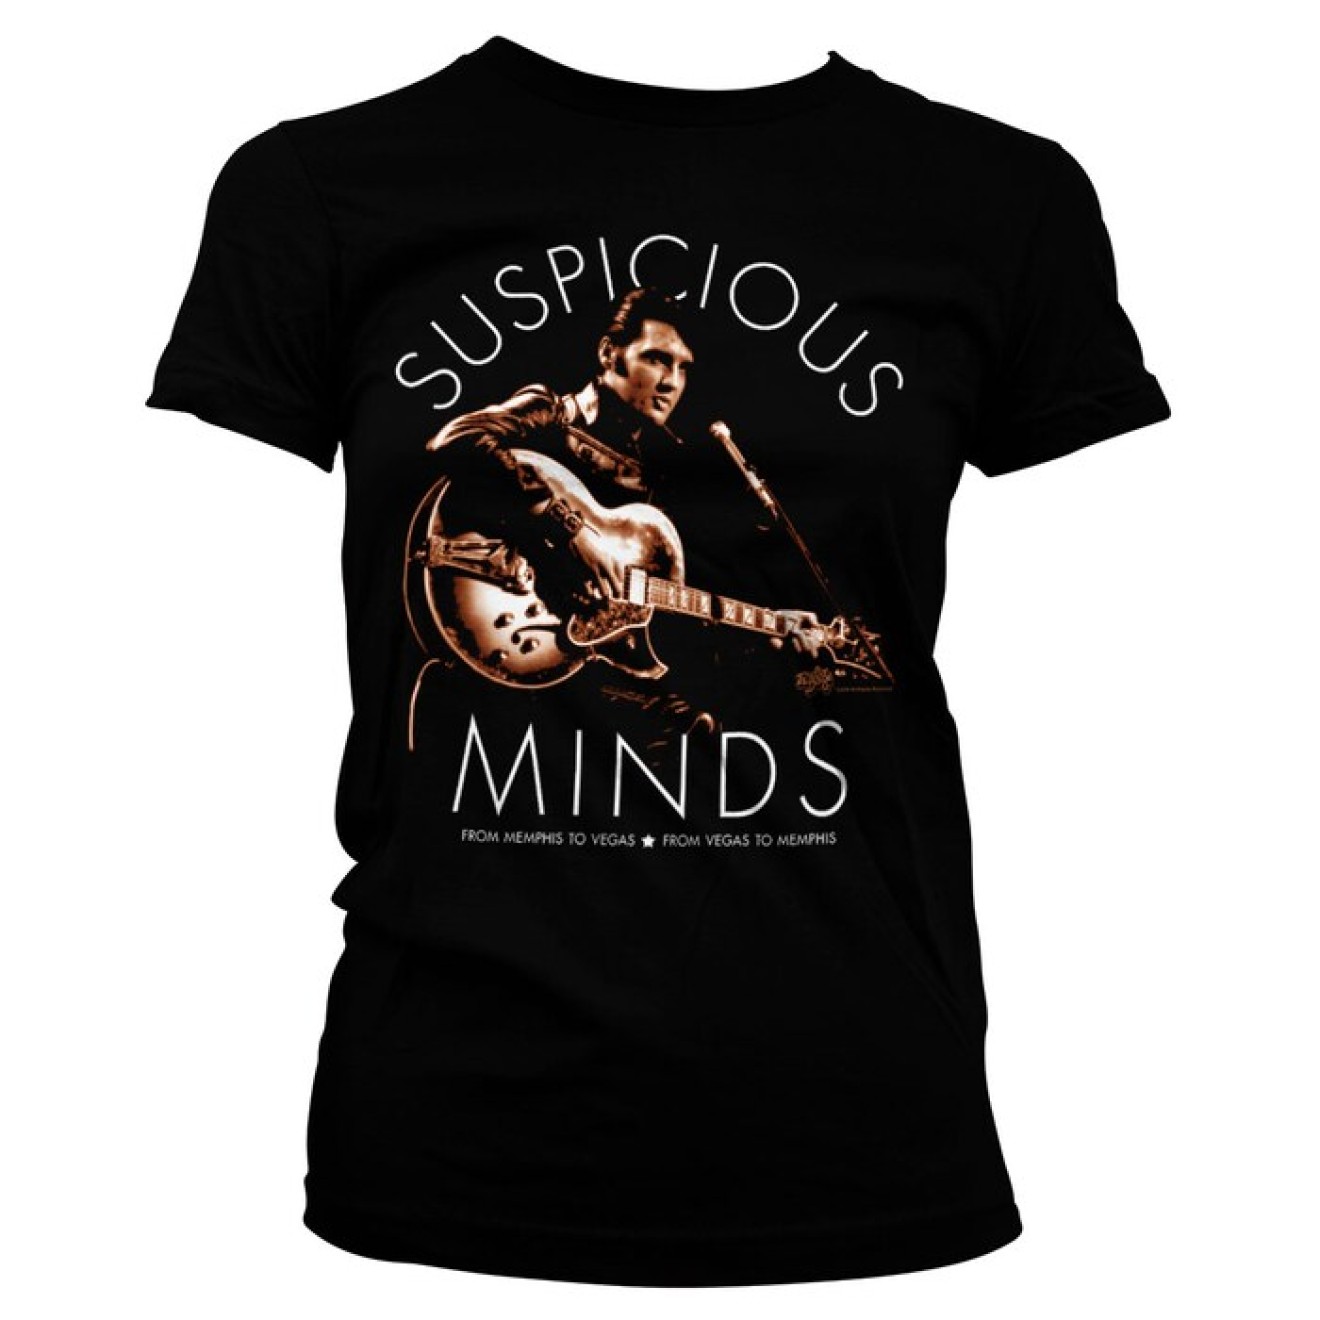 Elvis Presley - Suspicious Minds Girly Tee T-Shirt